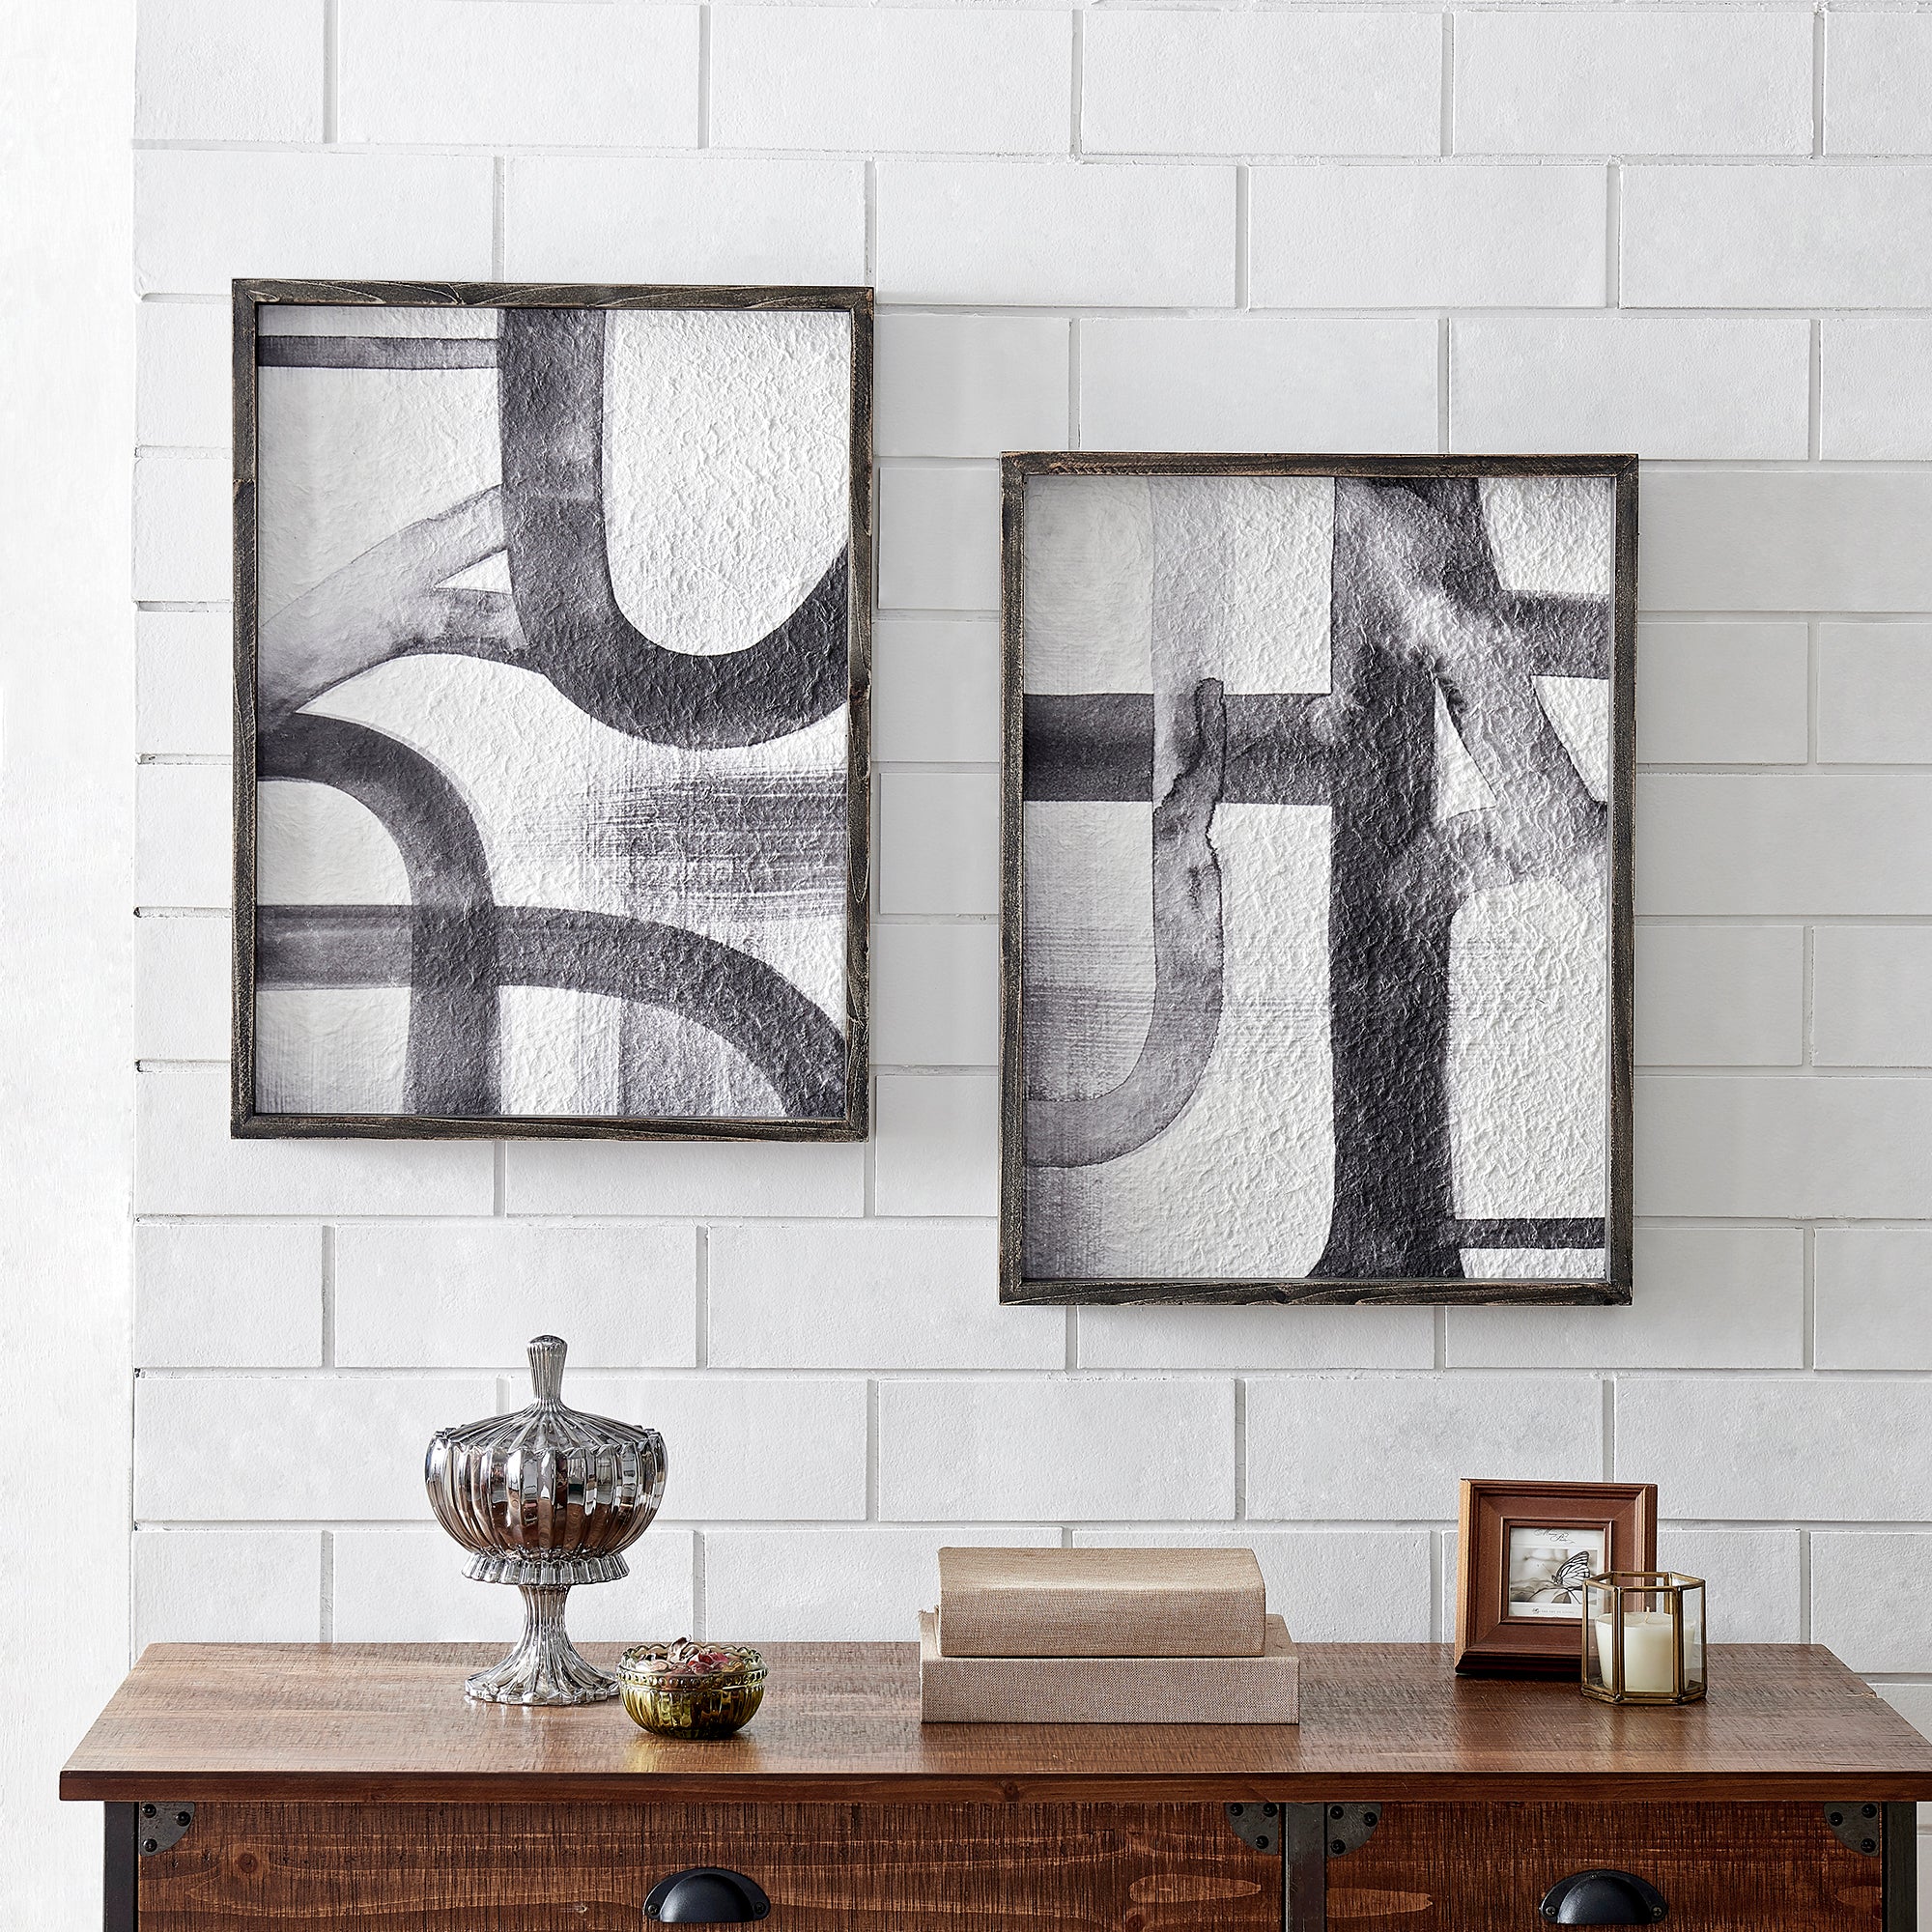 Gallery set with clock and frames